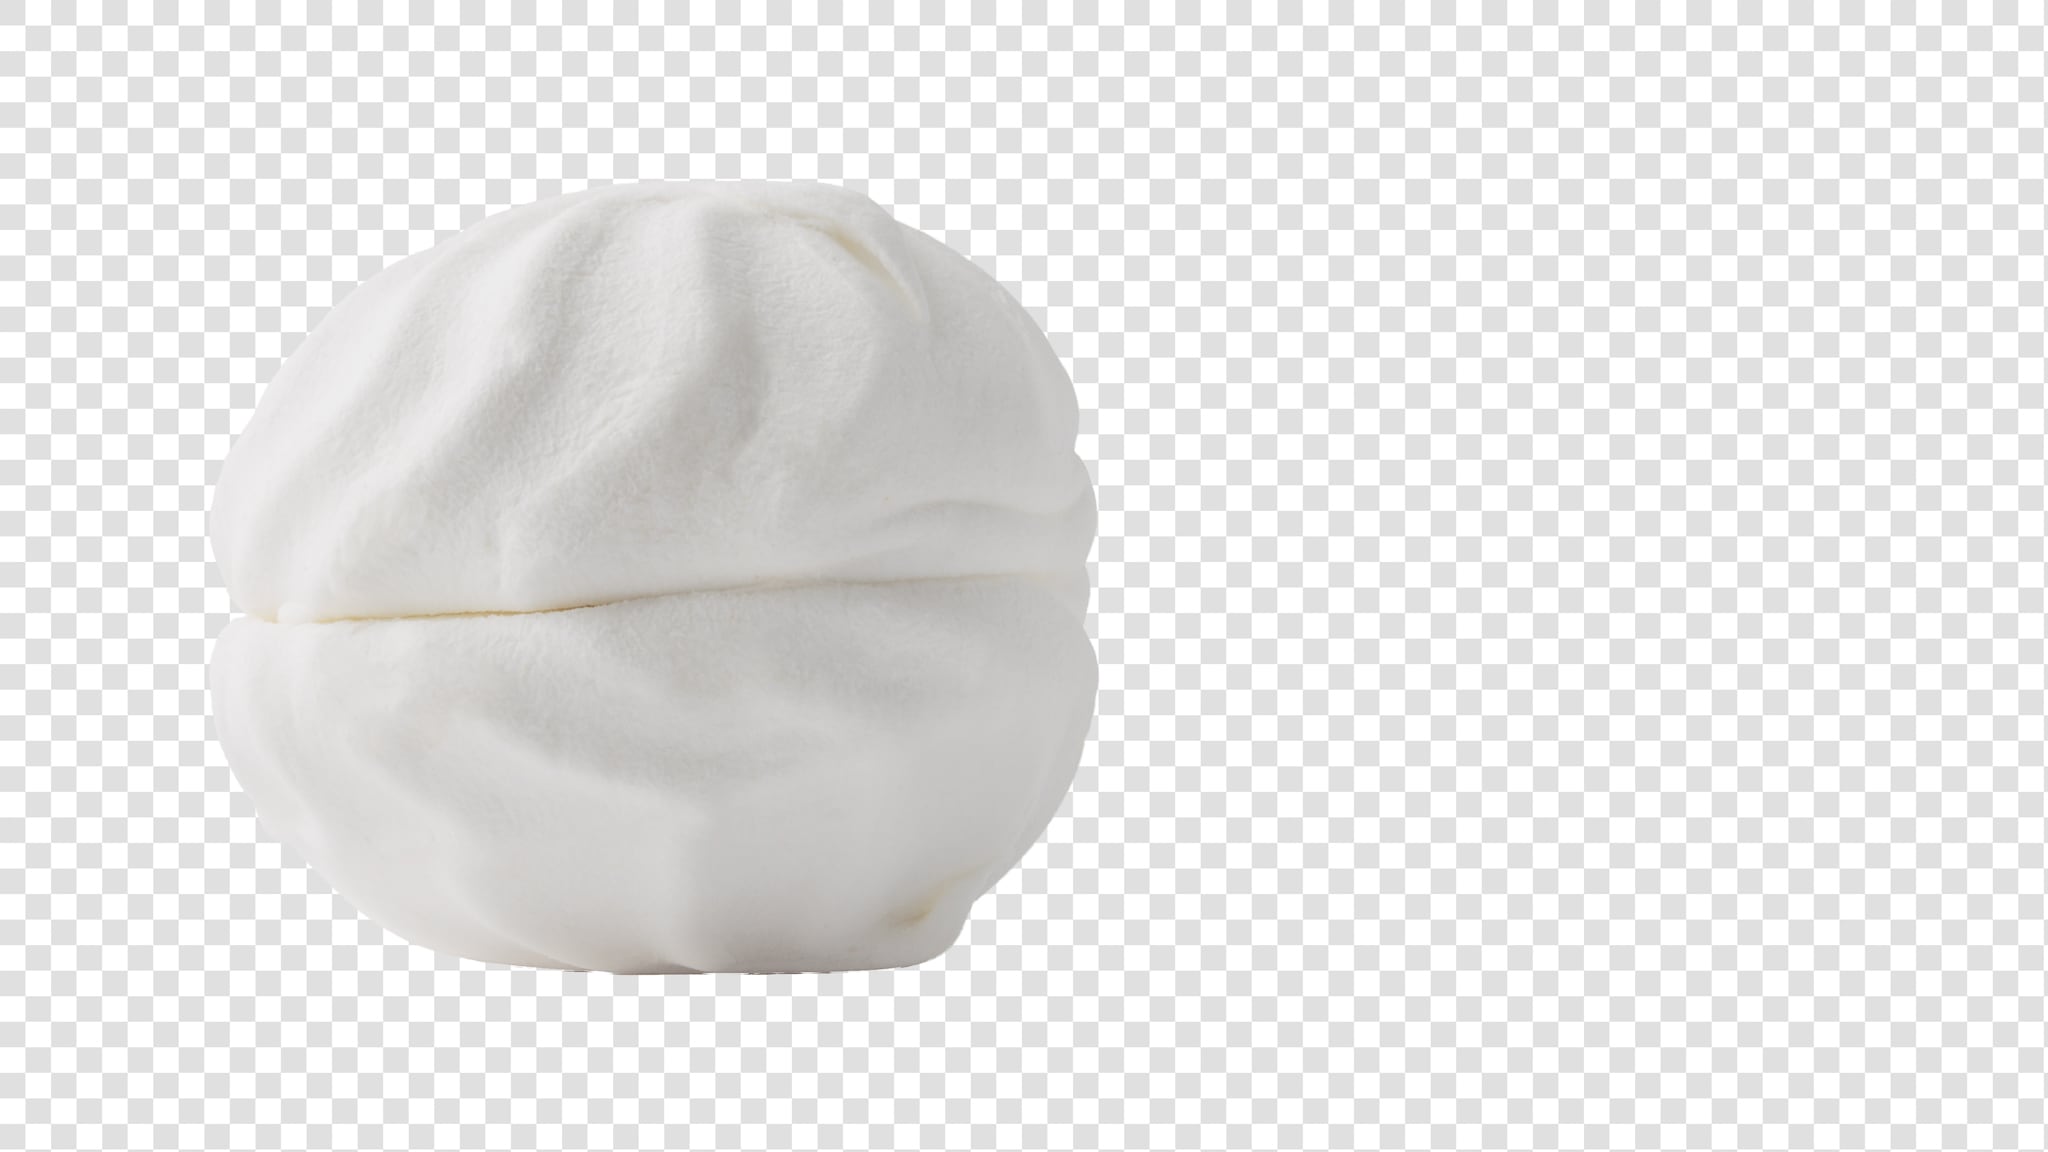 Marshmallow image asset with transparent background